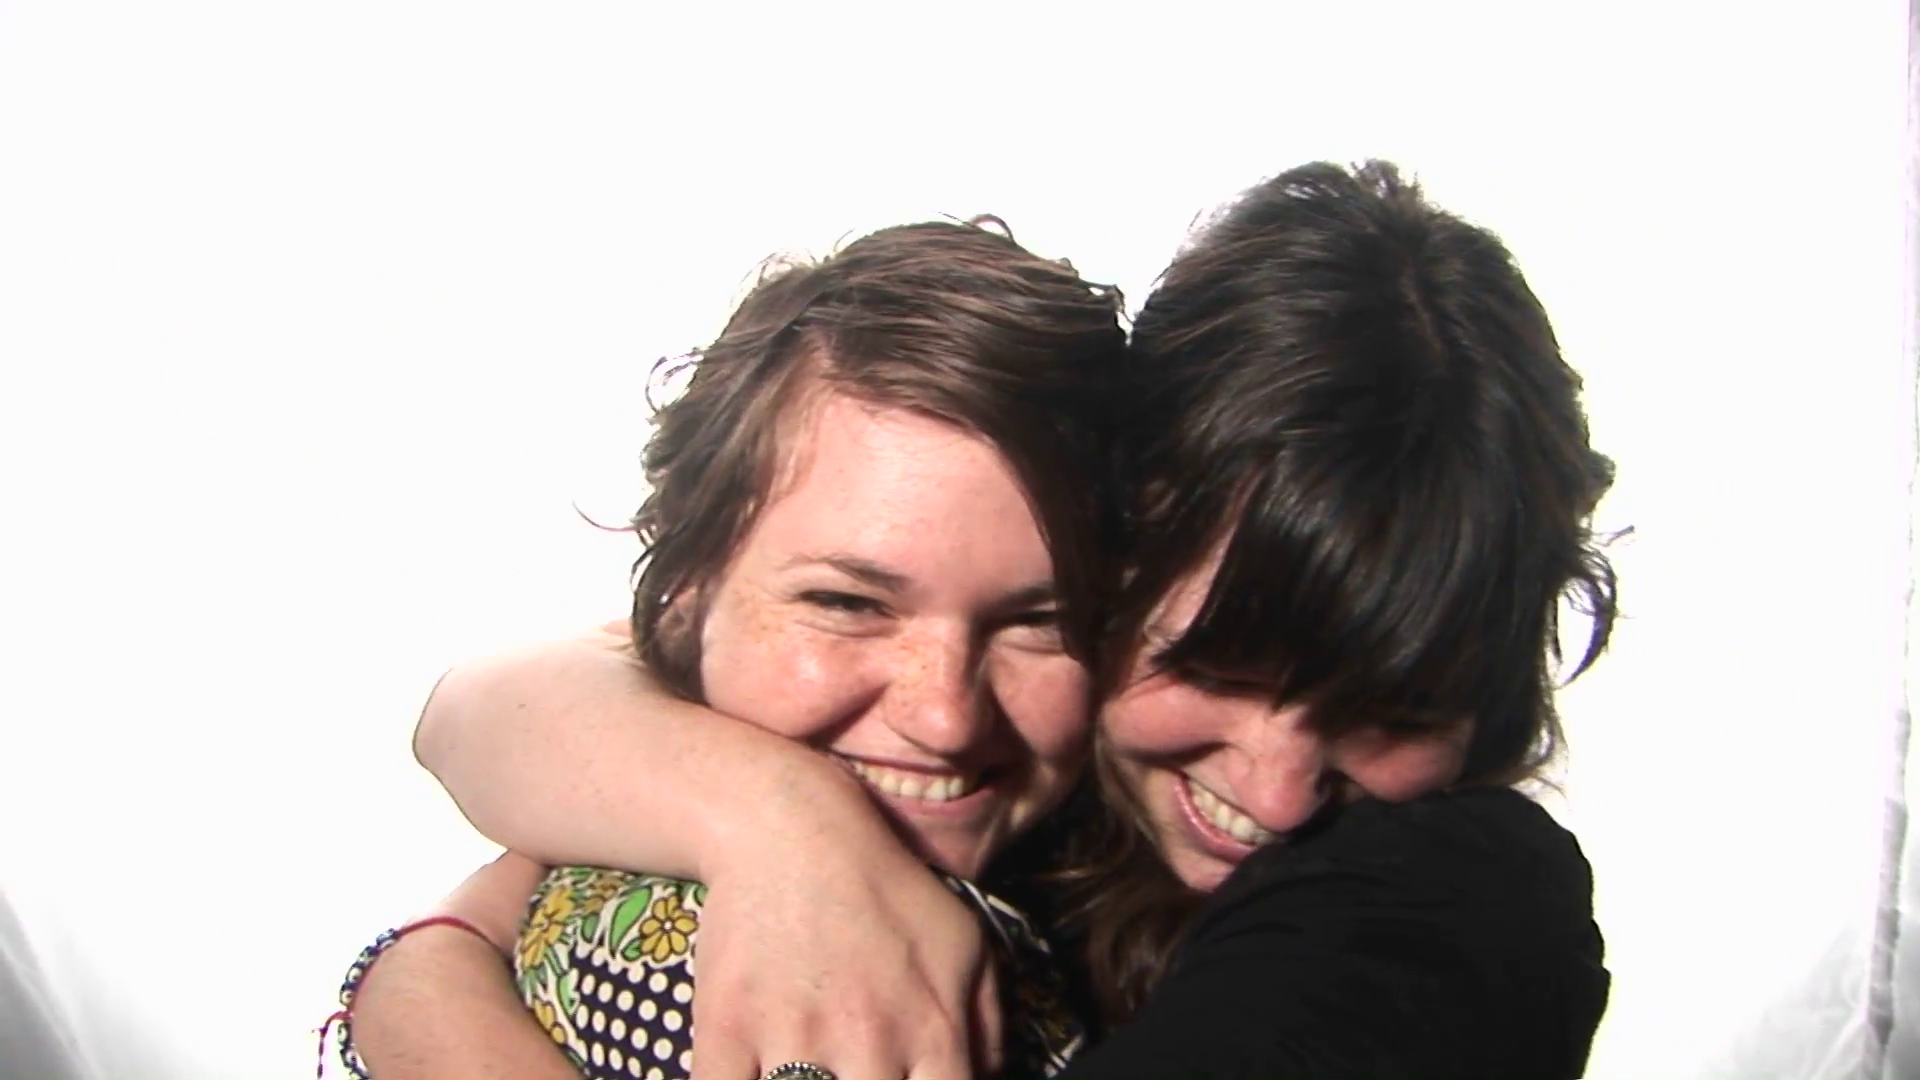 Two young women share a hug. Stock Video Footage - Videoblocks